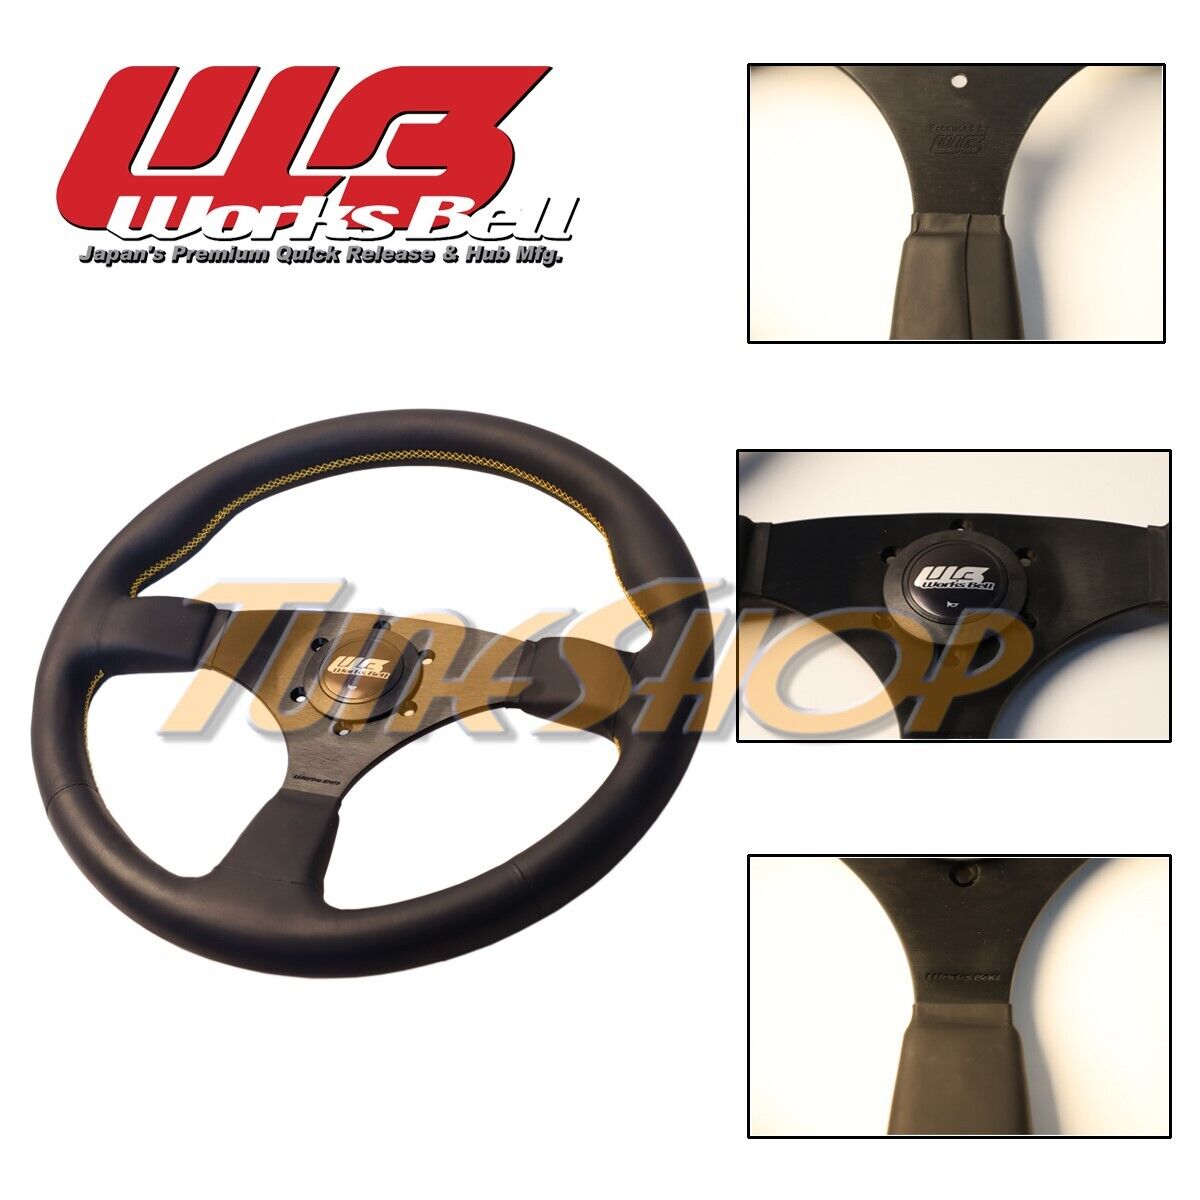 WORKS BELL TYPE III 350MM STEERING WHEEL LEATHER YELLOW STITCHING SILVER HORN